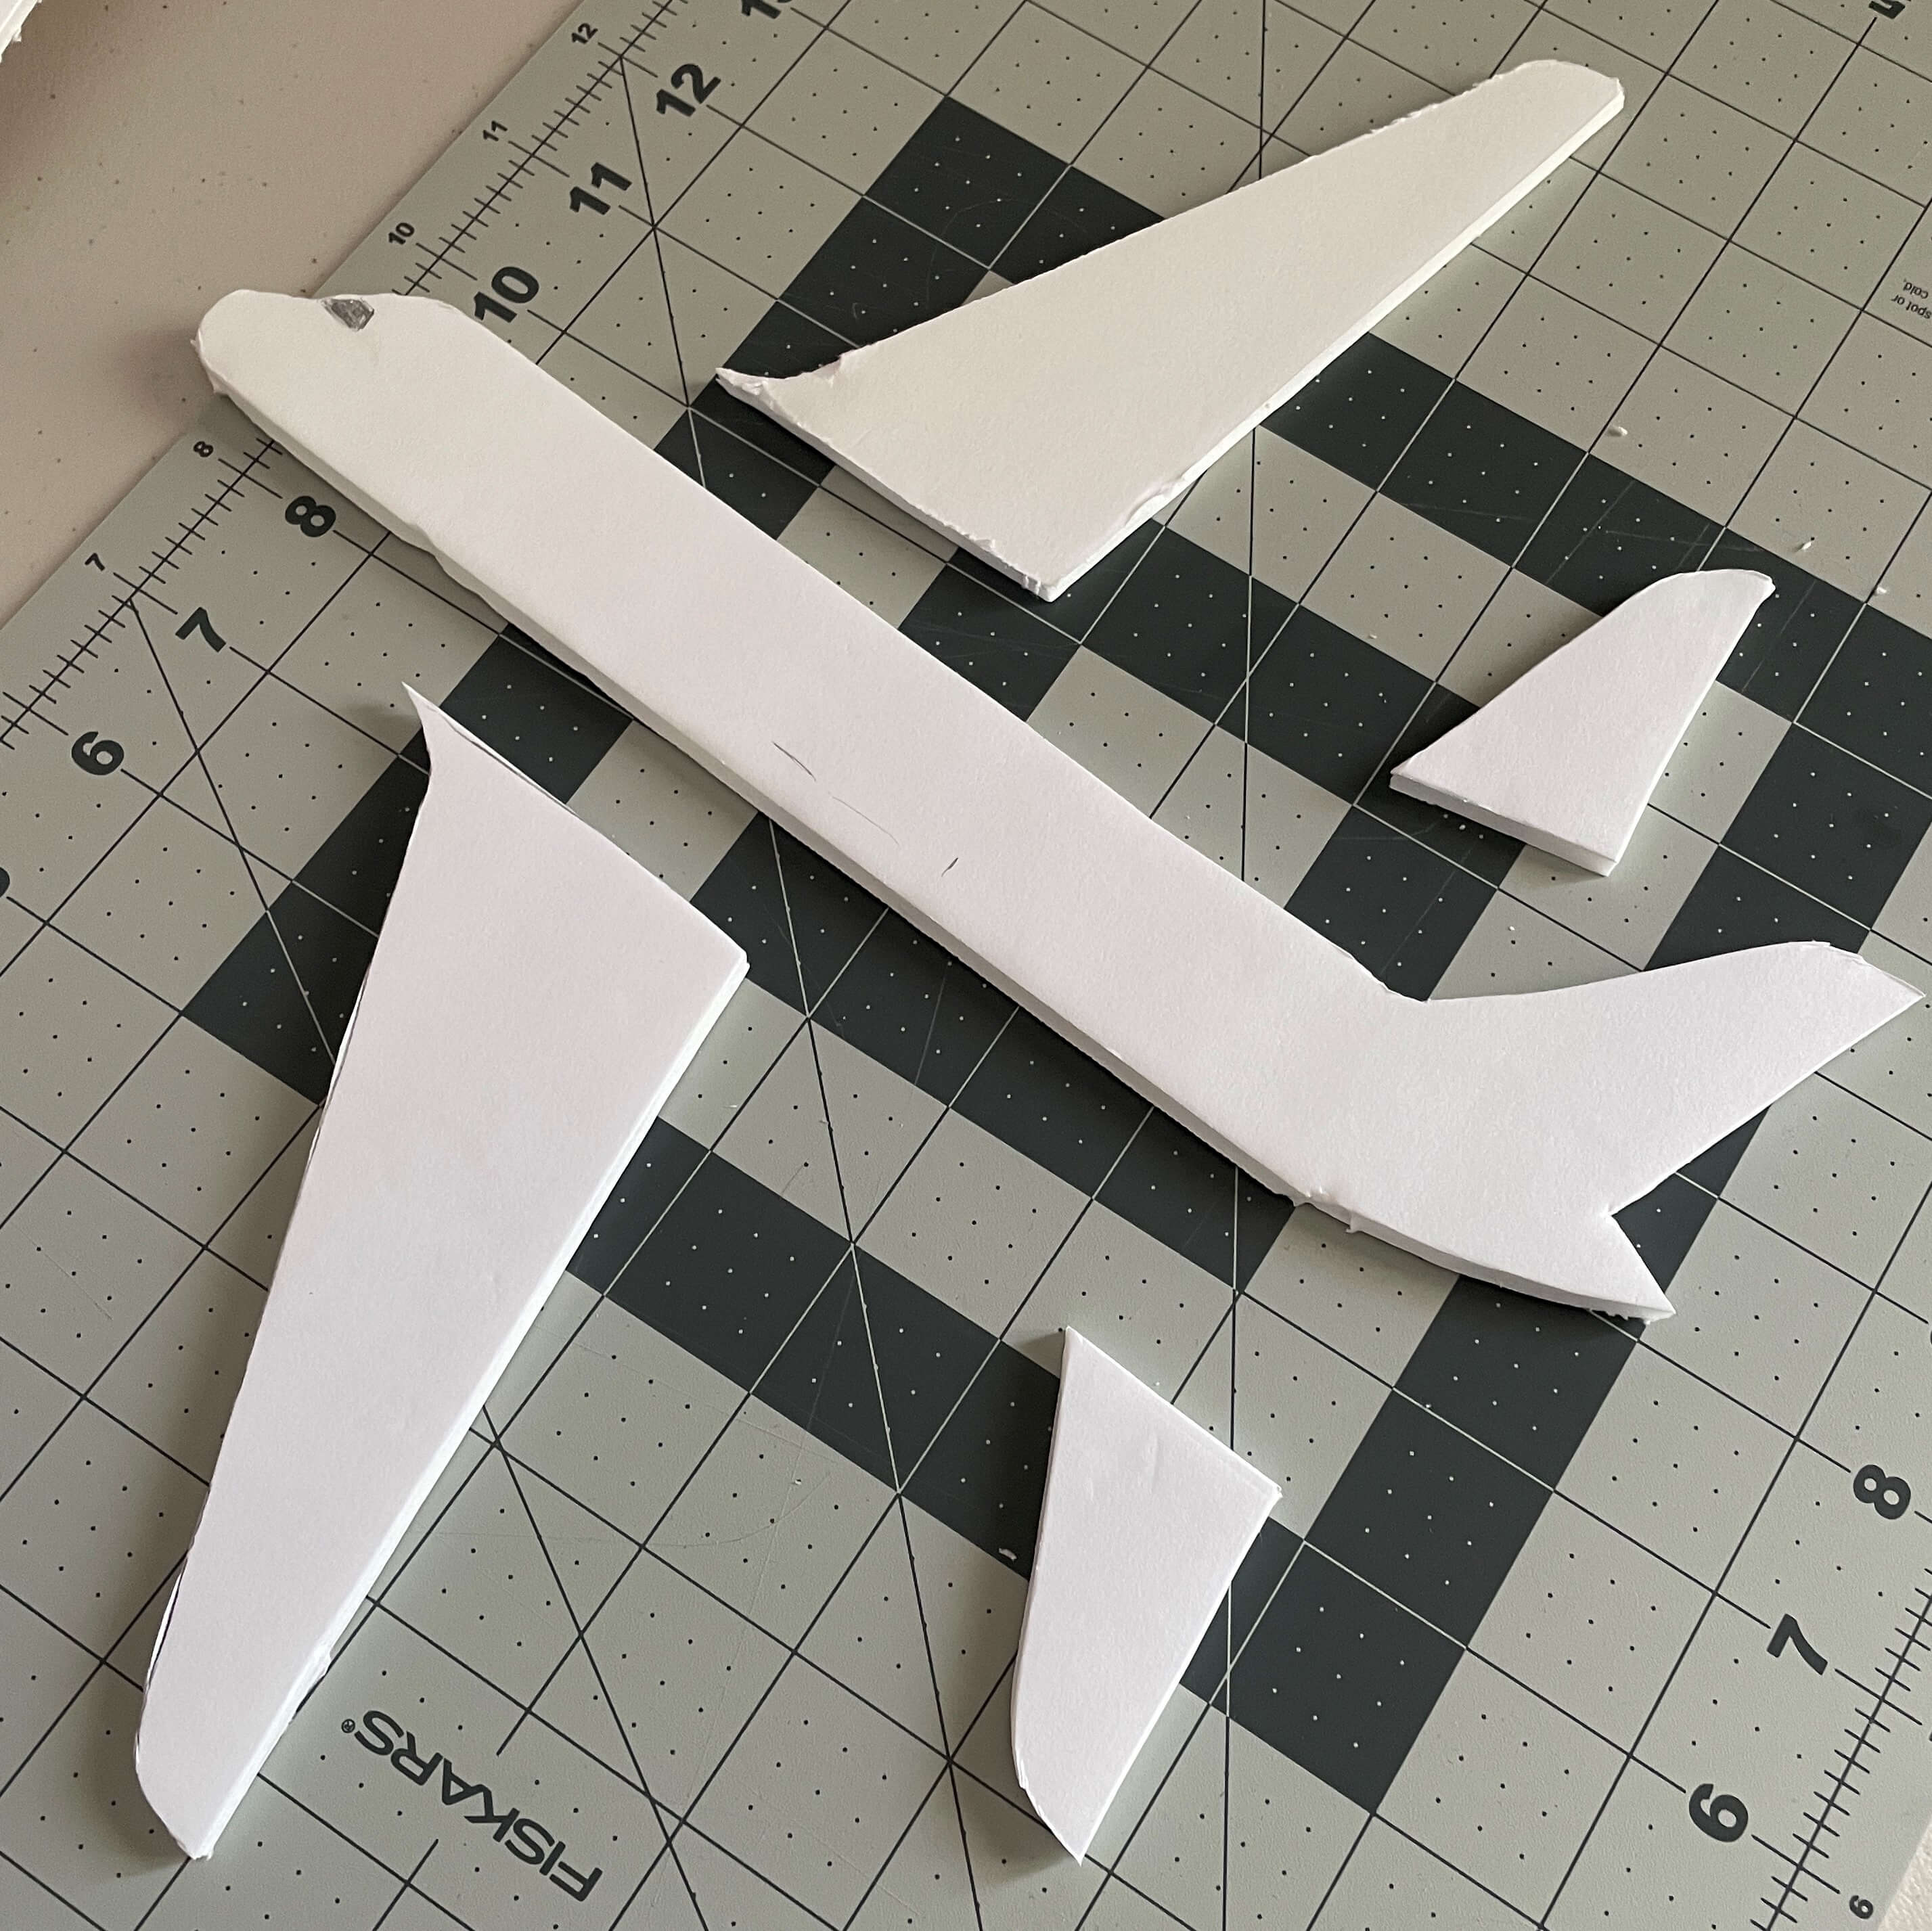 All Plane Pieces